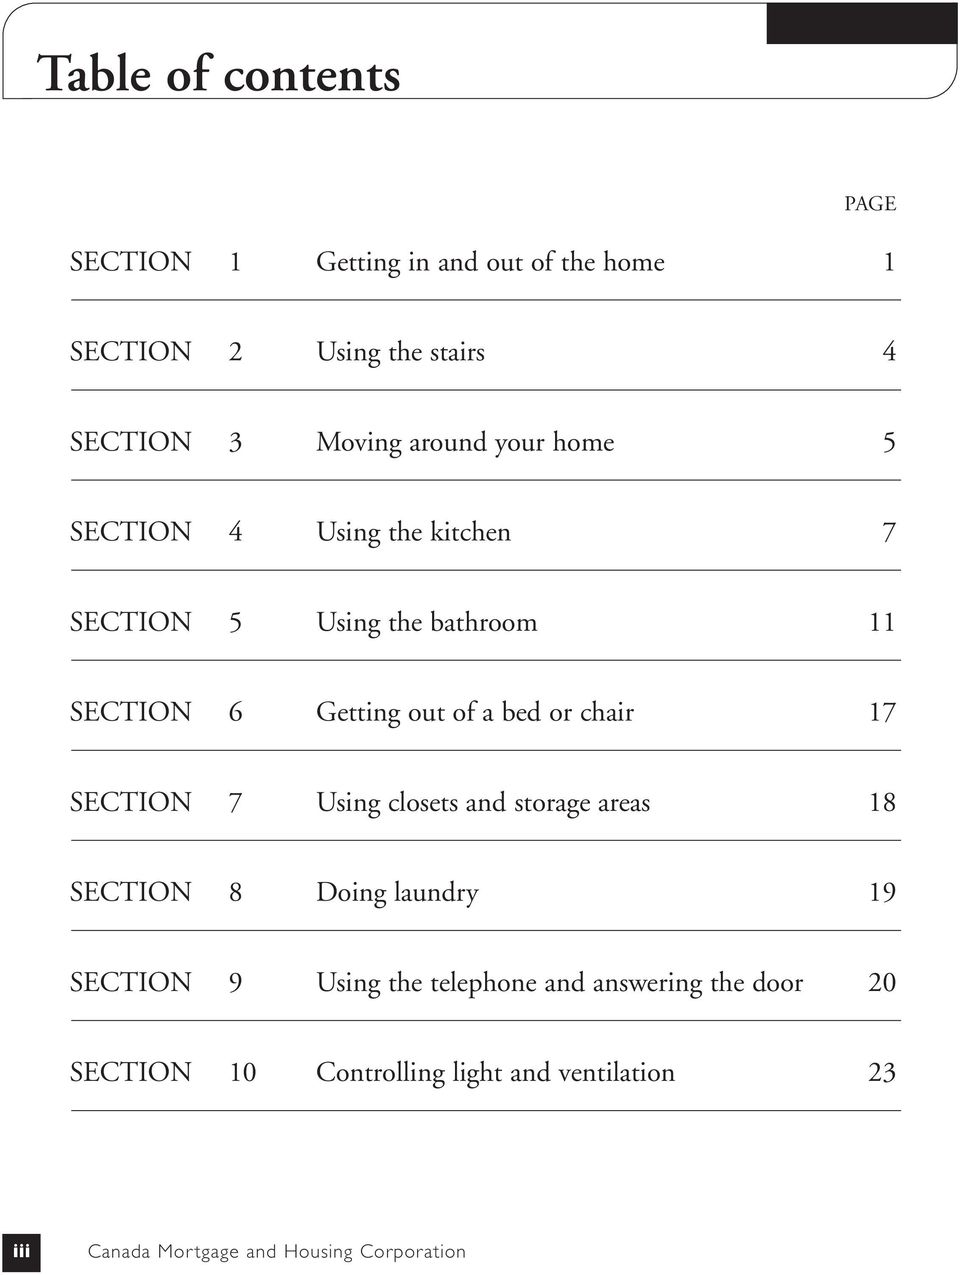 or chair 17 SECTION 7 Using closets and storage areas 18 SECTION 8 Doing laundry 19 SECTION 9 Using the telephone